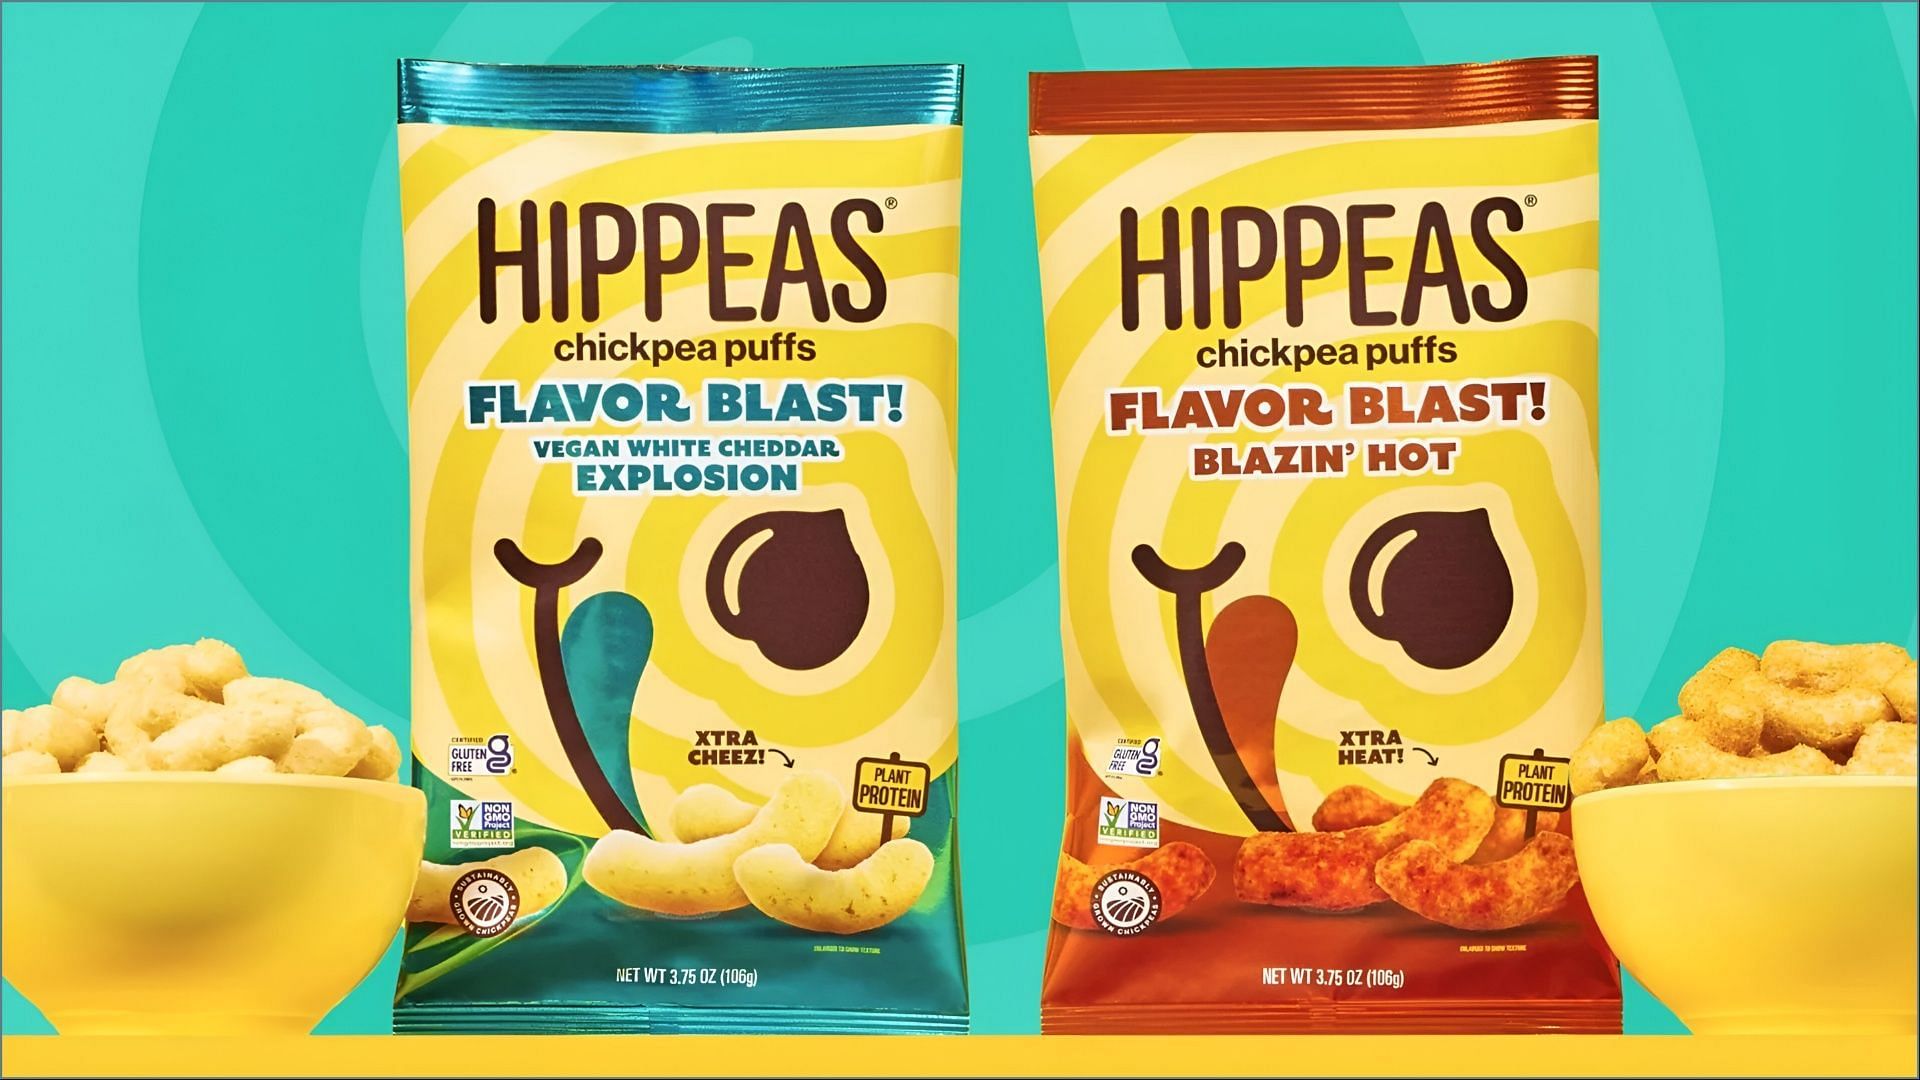 The new Flavor Blast! Chickpea Puffs are priced at over $4 each (Image via Hippeas)